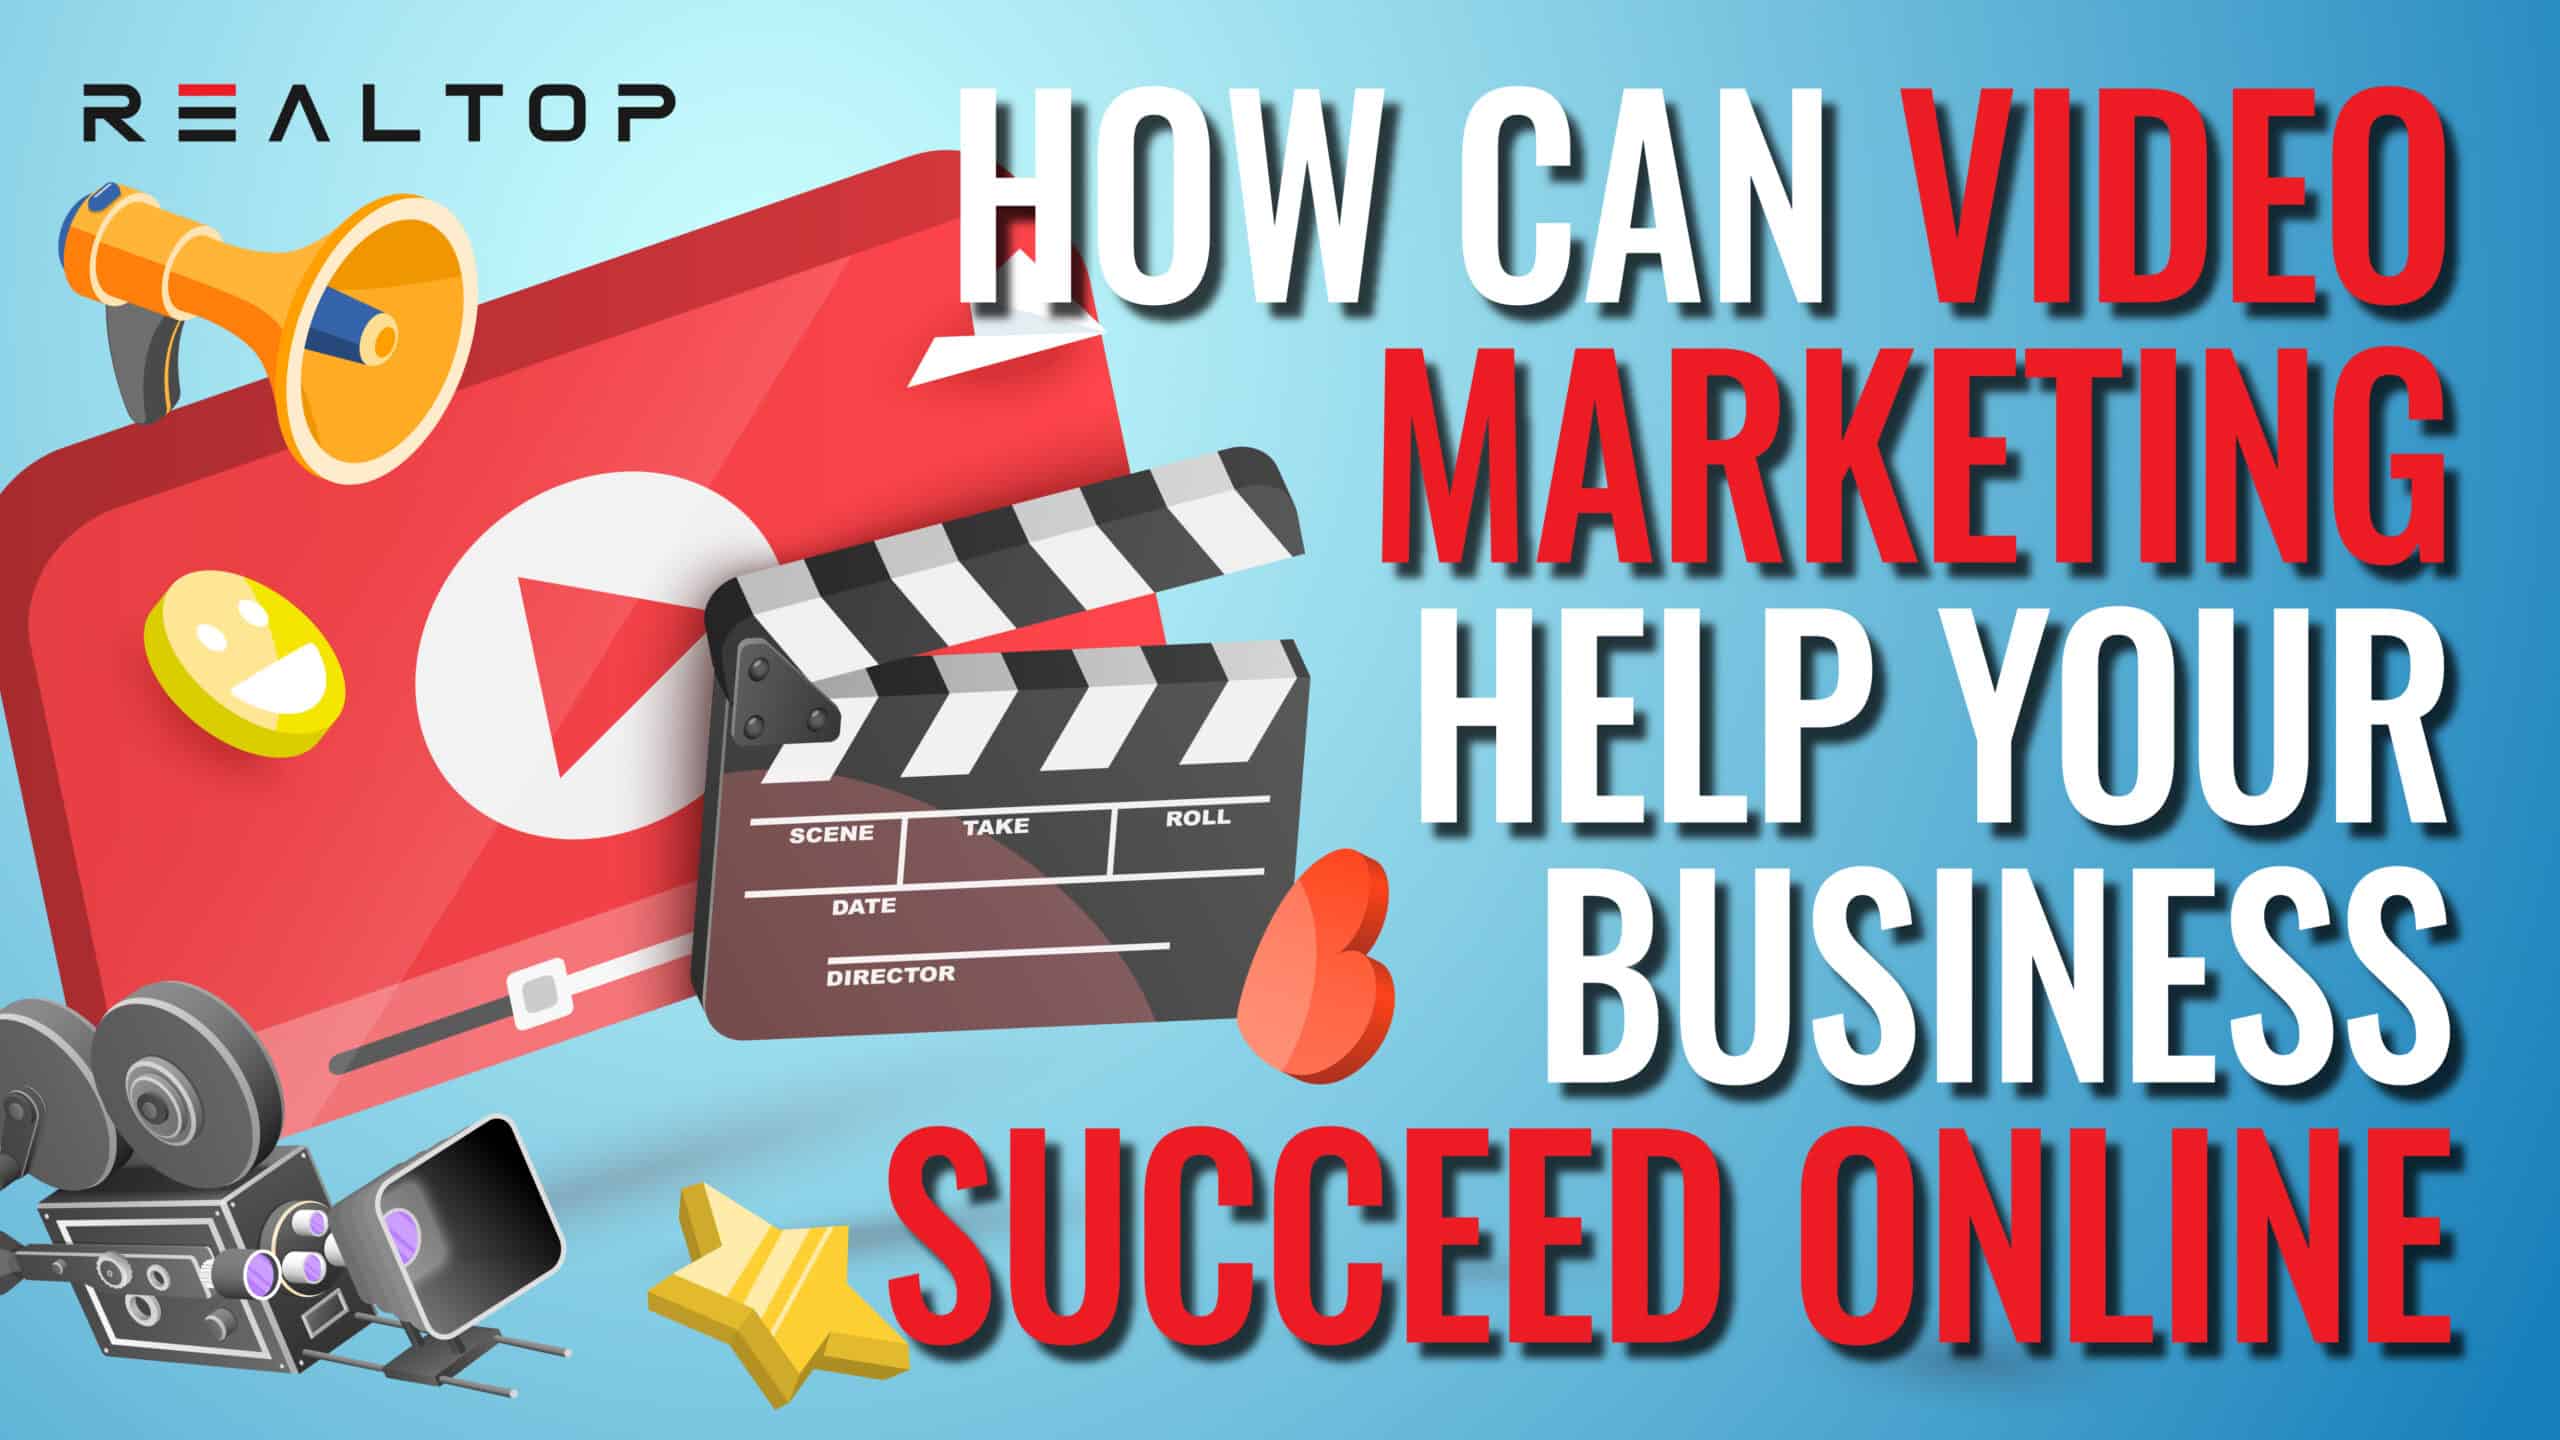 How can video marketing help your business